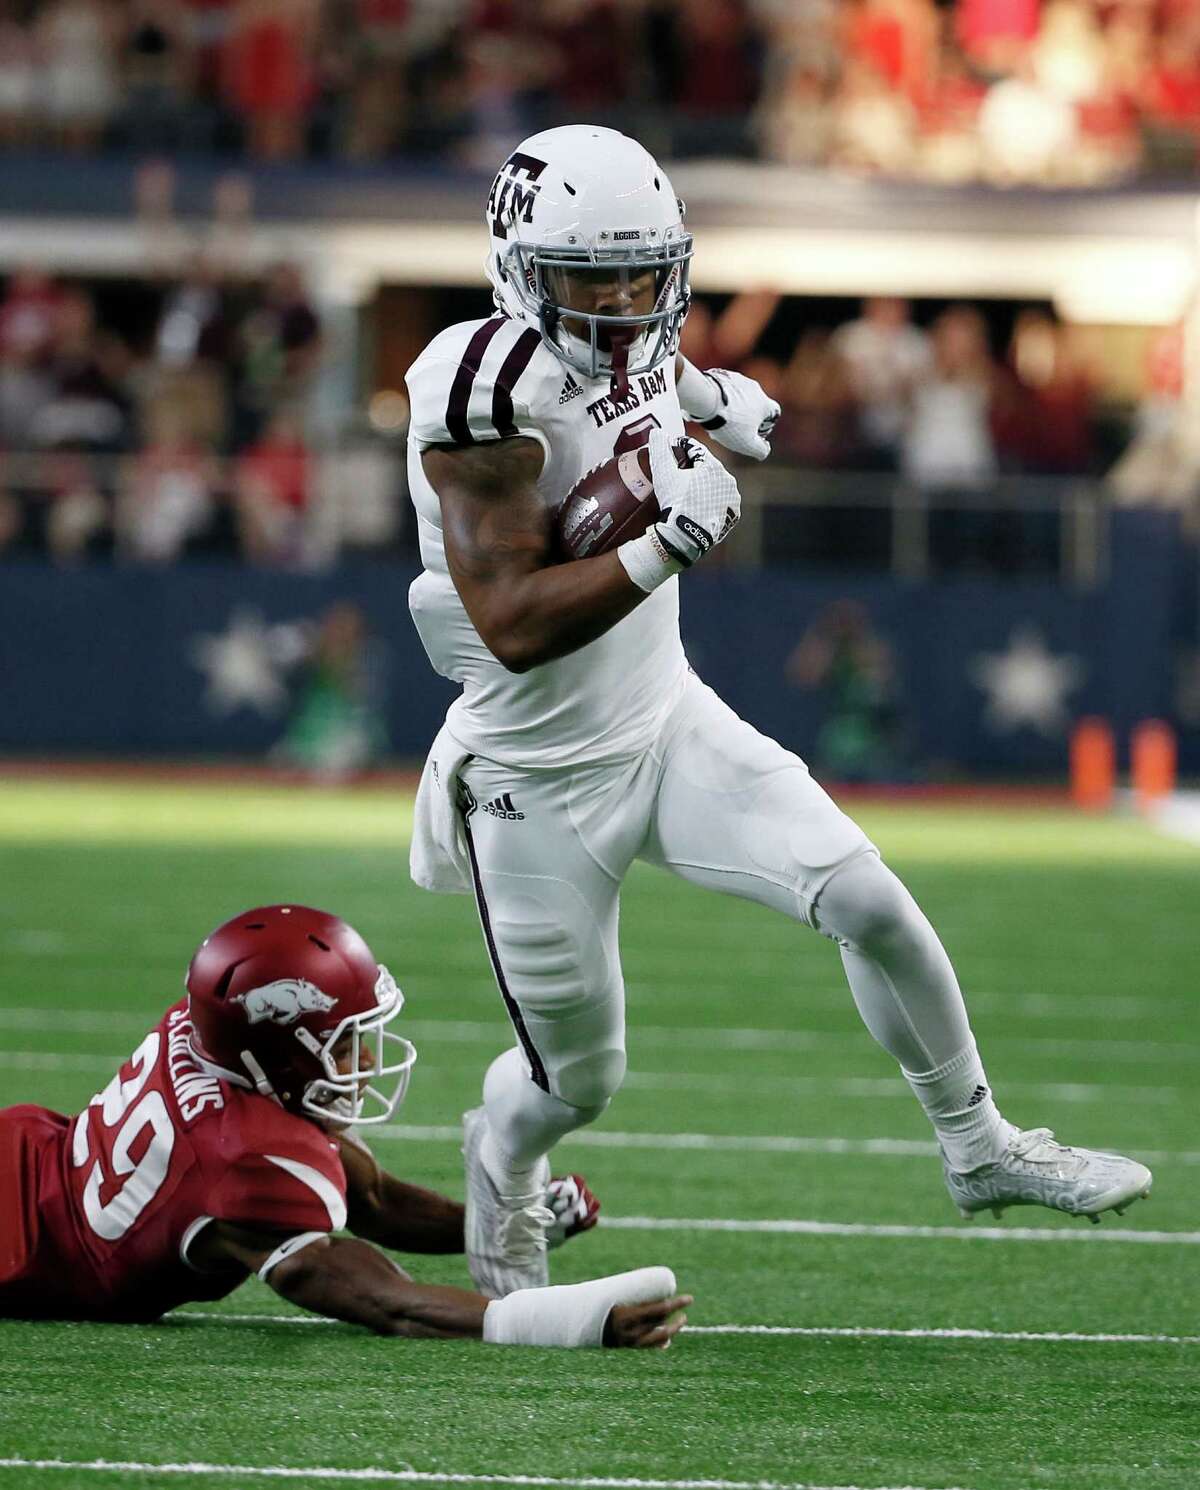 Texas A&M's alleverything Christian Kirk named SEC's freshman of the year